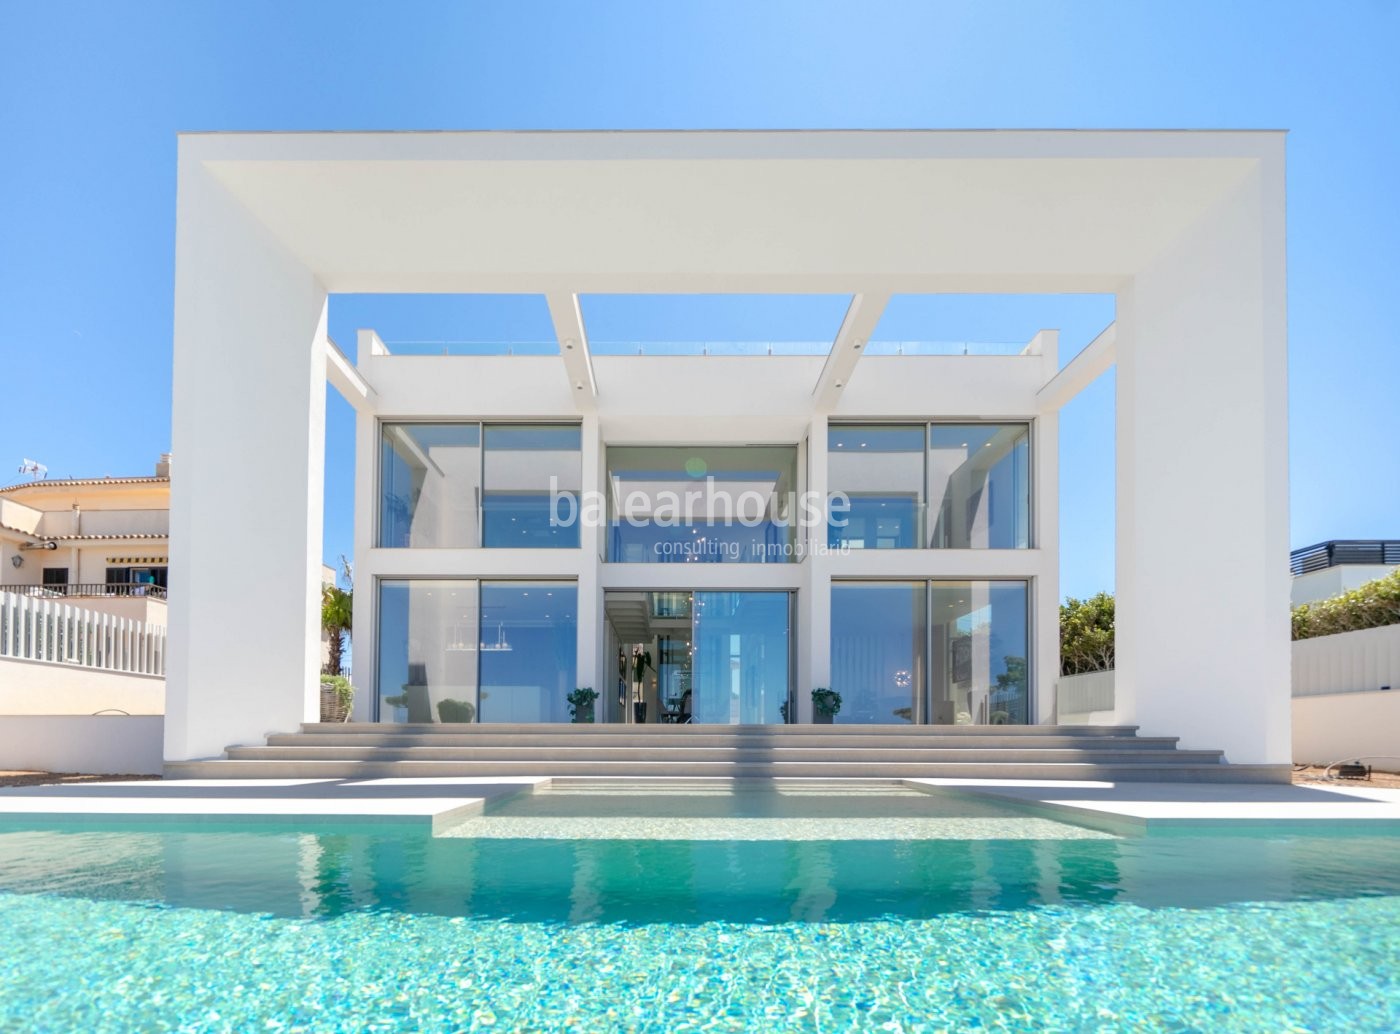 Sensational newly built villa in Port Adriano, which stretches out like a great lookout to the sea